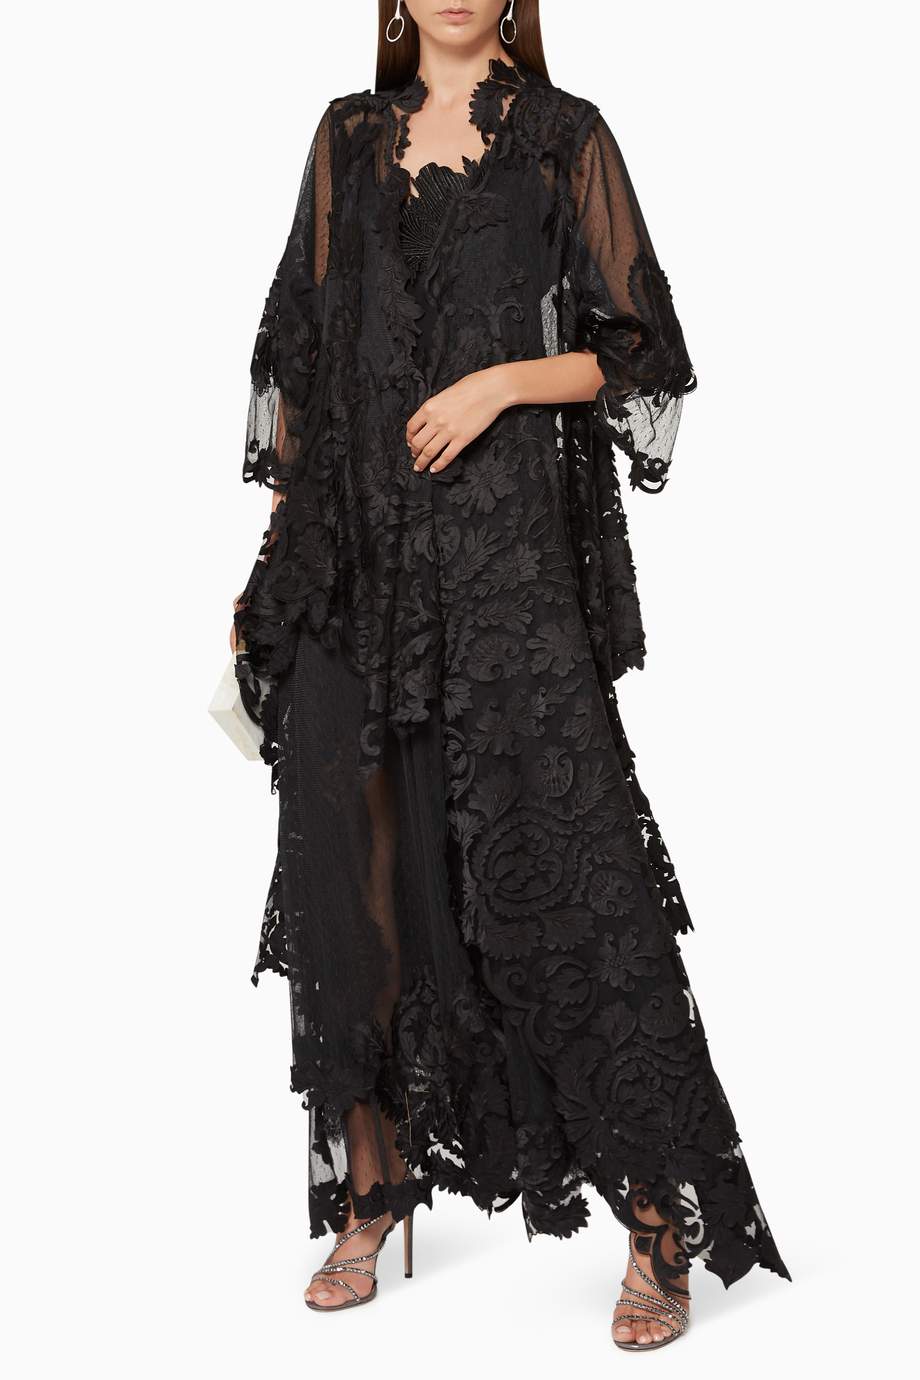 Shop Pearl Haute Couture Black Floral Lace Abaya for Women | Ounass UAE